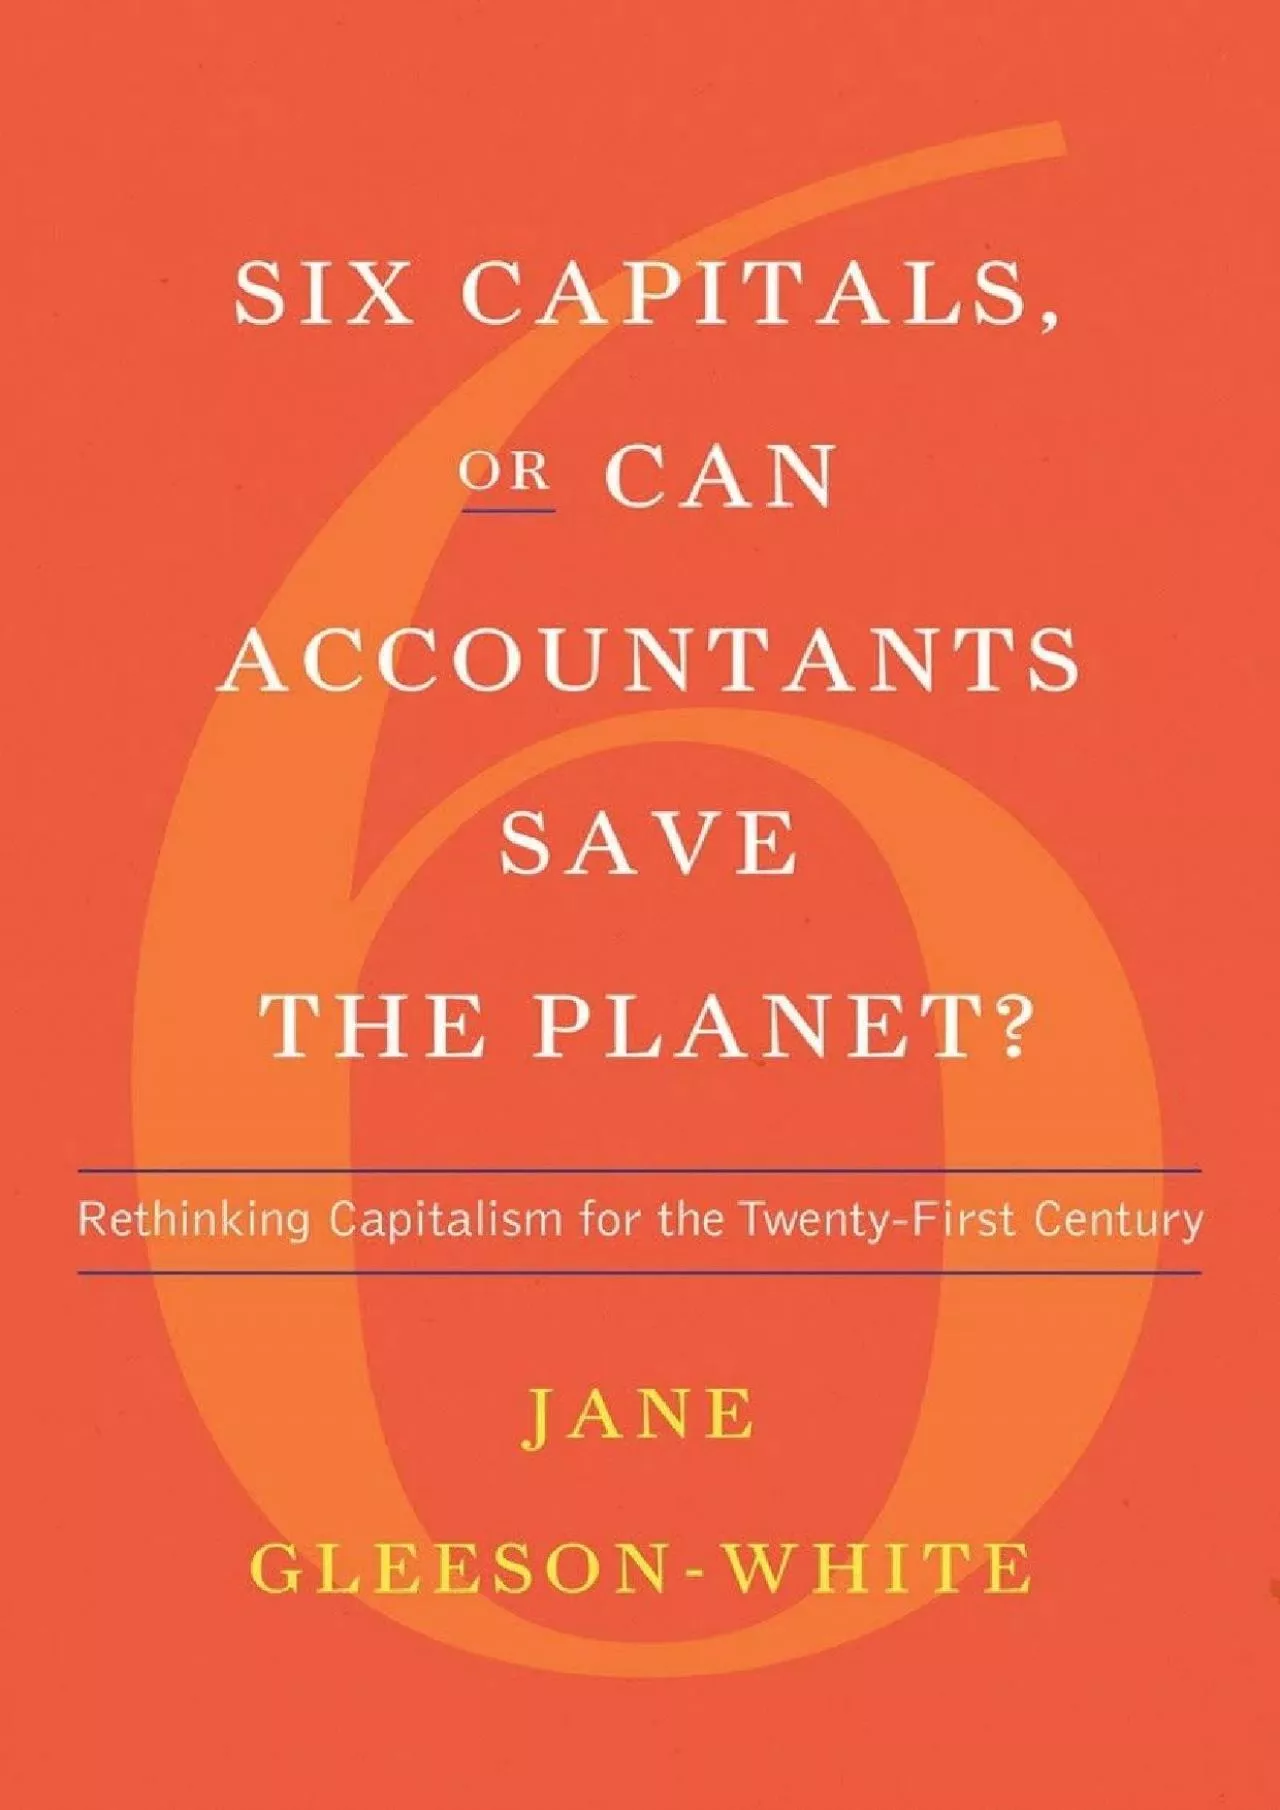 (EBOOK)-Six Capitals, or Can Accountants Save the Planet?: Rethinking Capitalism for the